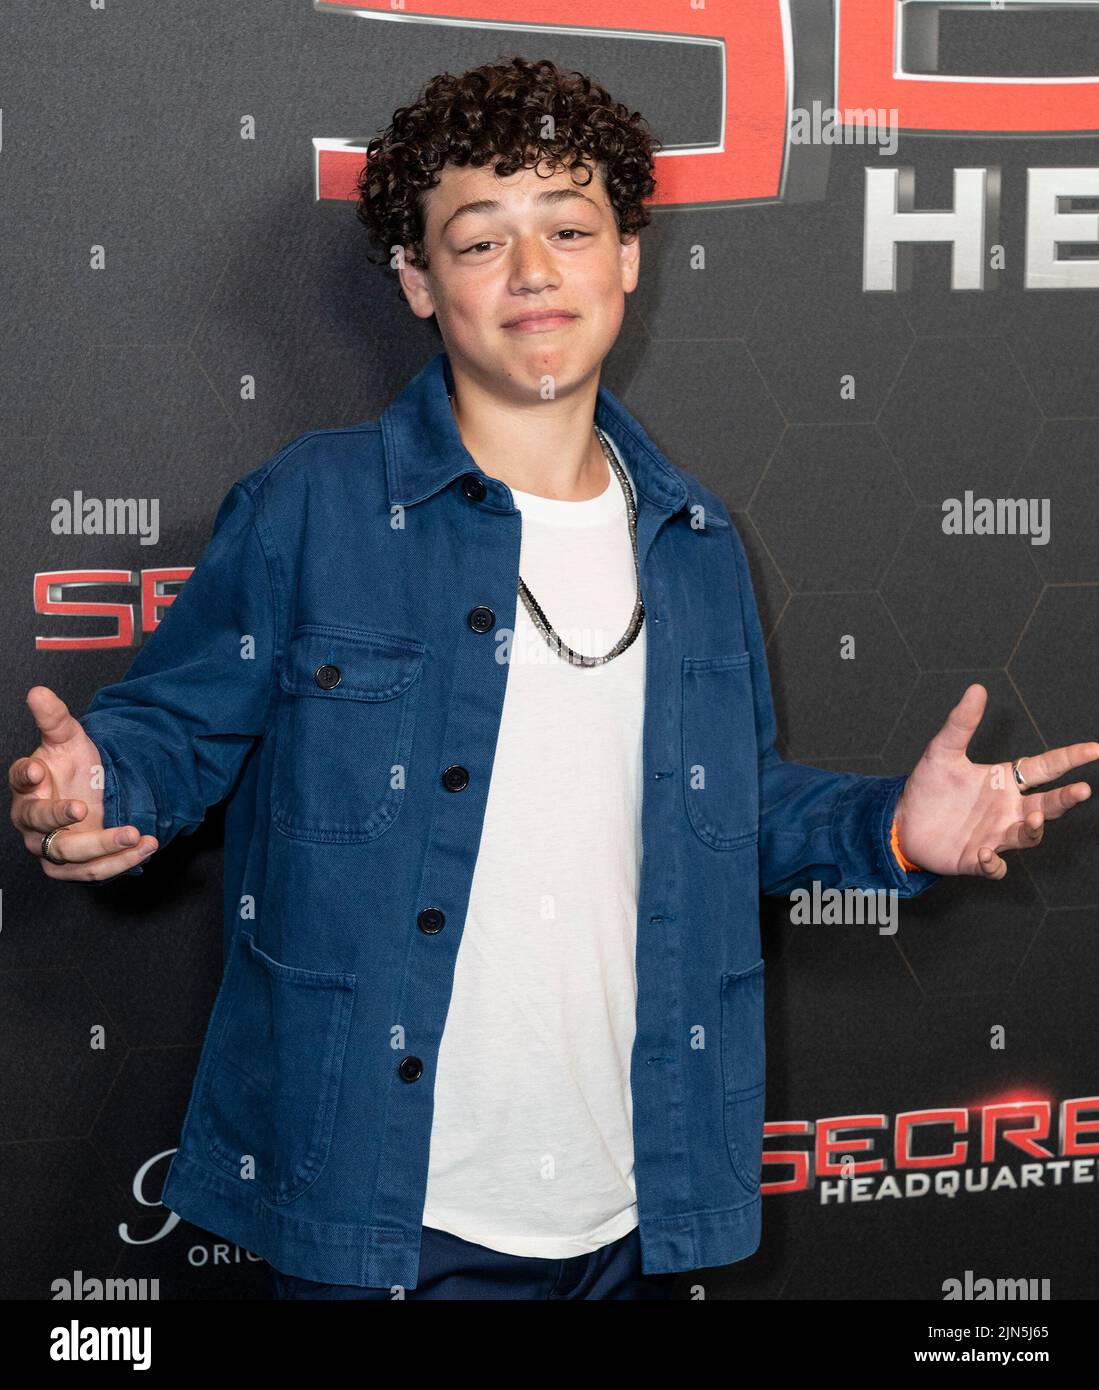 New York, United States. 08th Aug, 2022. Julian Lerner attends premiere of Paramount  movie Secret Headquarters at Signature Theatre (Photo by Lev Radin/Pacific Press) Credit: Pacific Press Media Production Corp./Alamy Live News Stock Photo